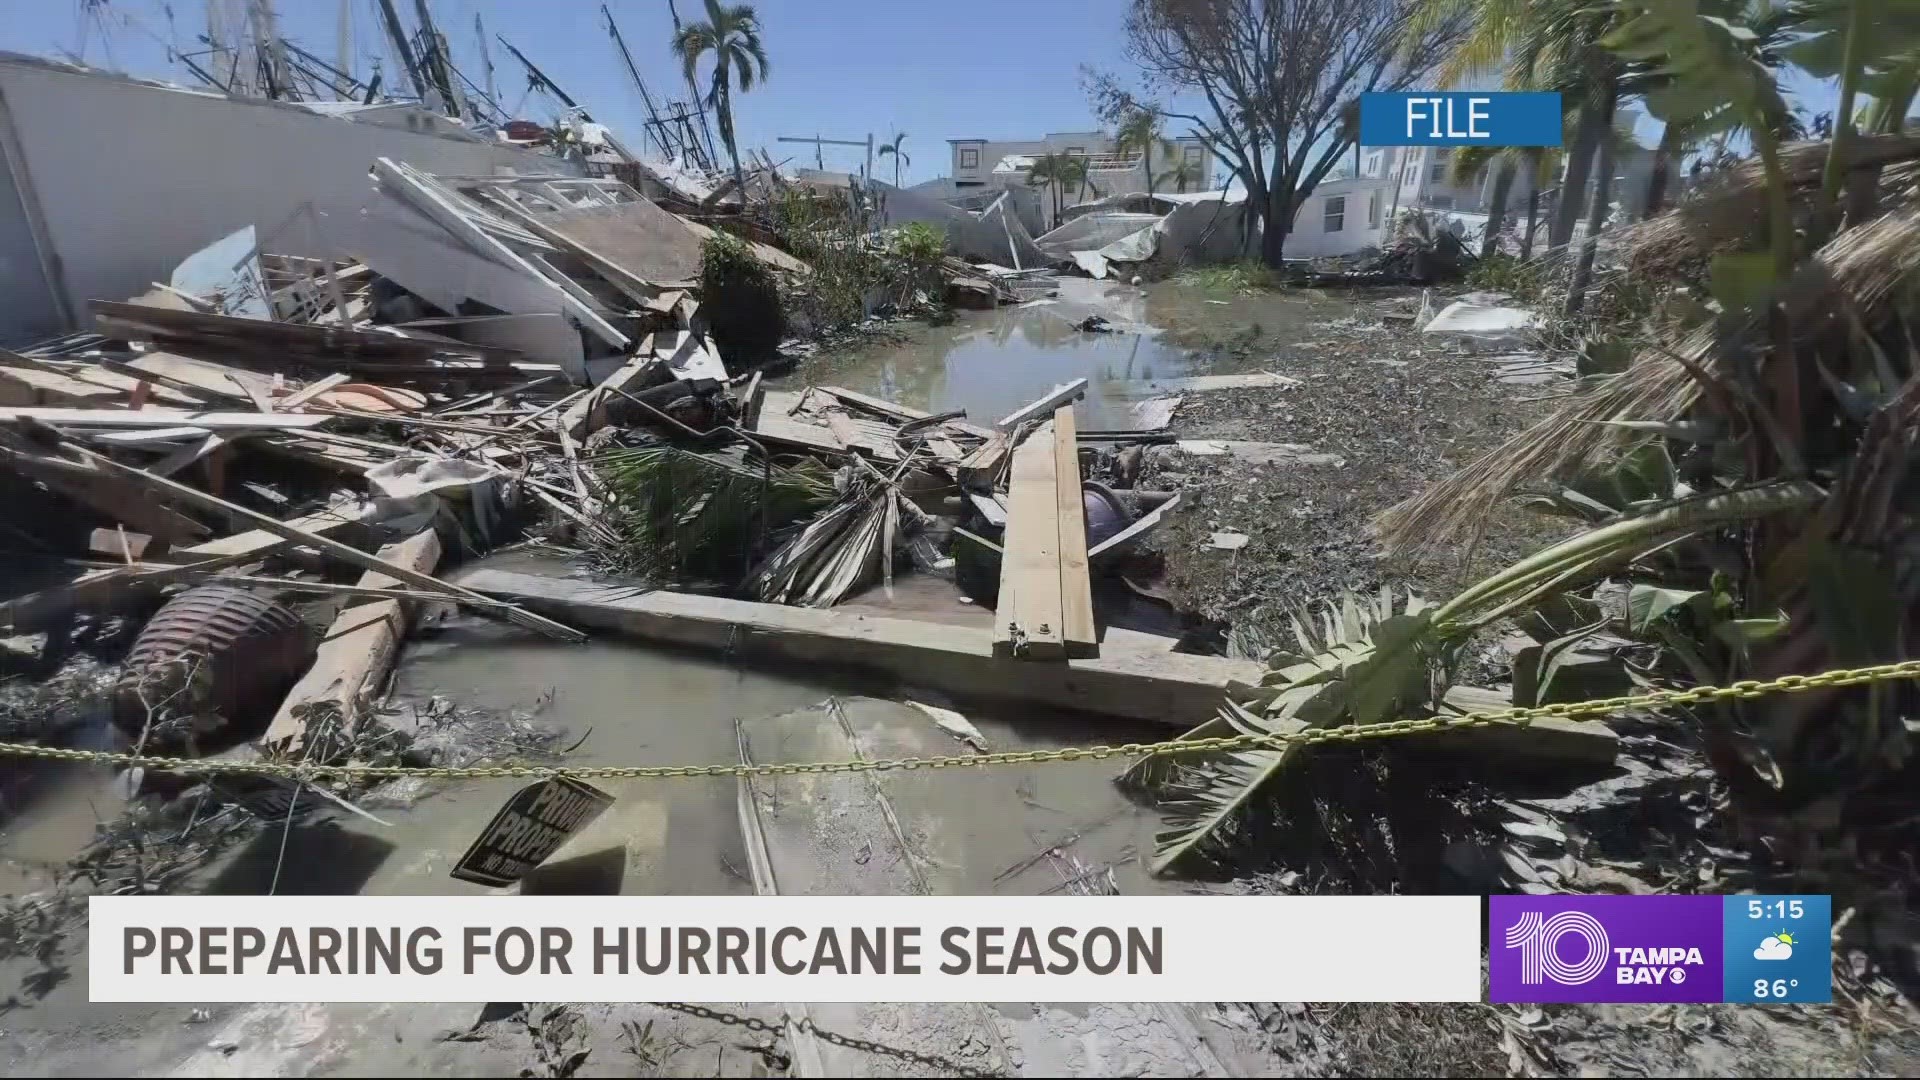 Officials say now is a good time to start preparing for hurricane season.